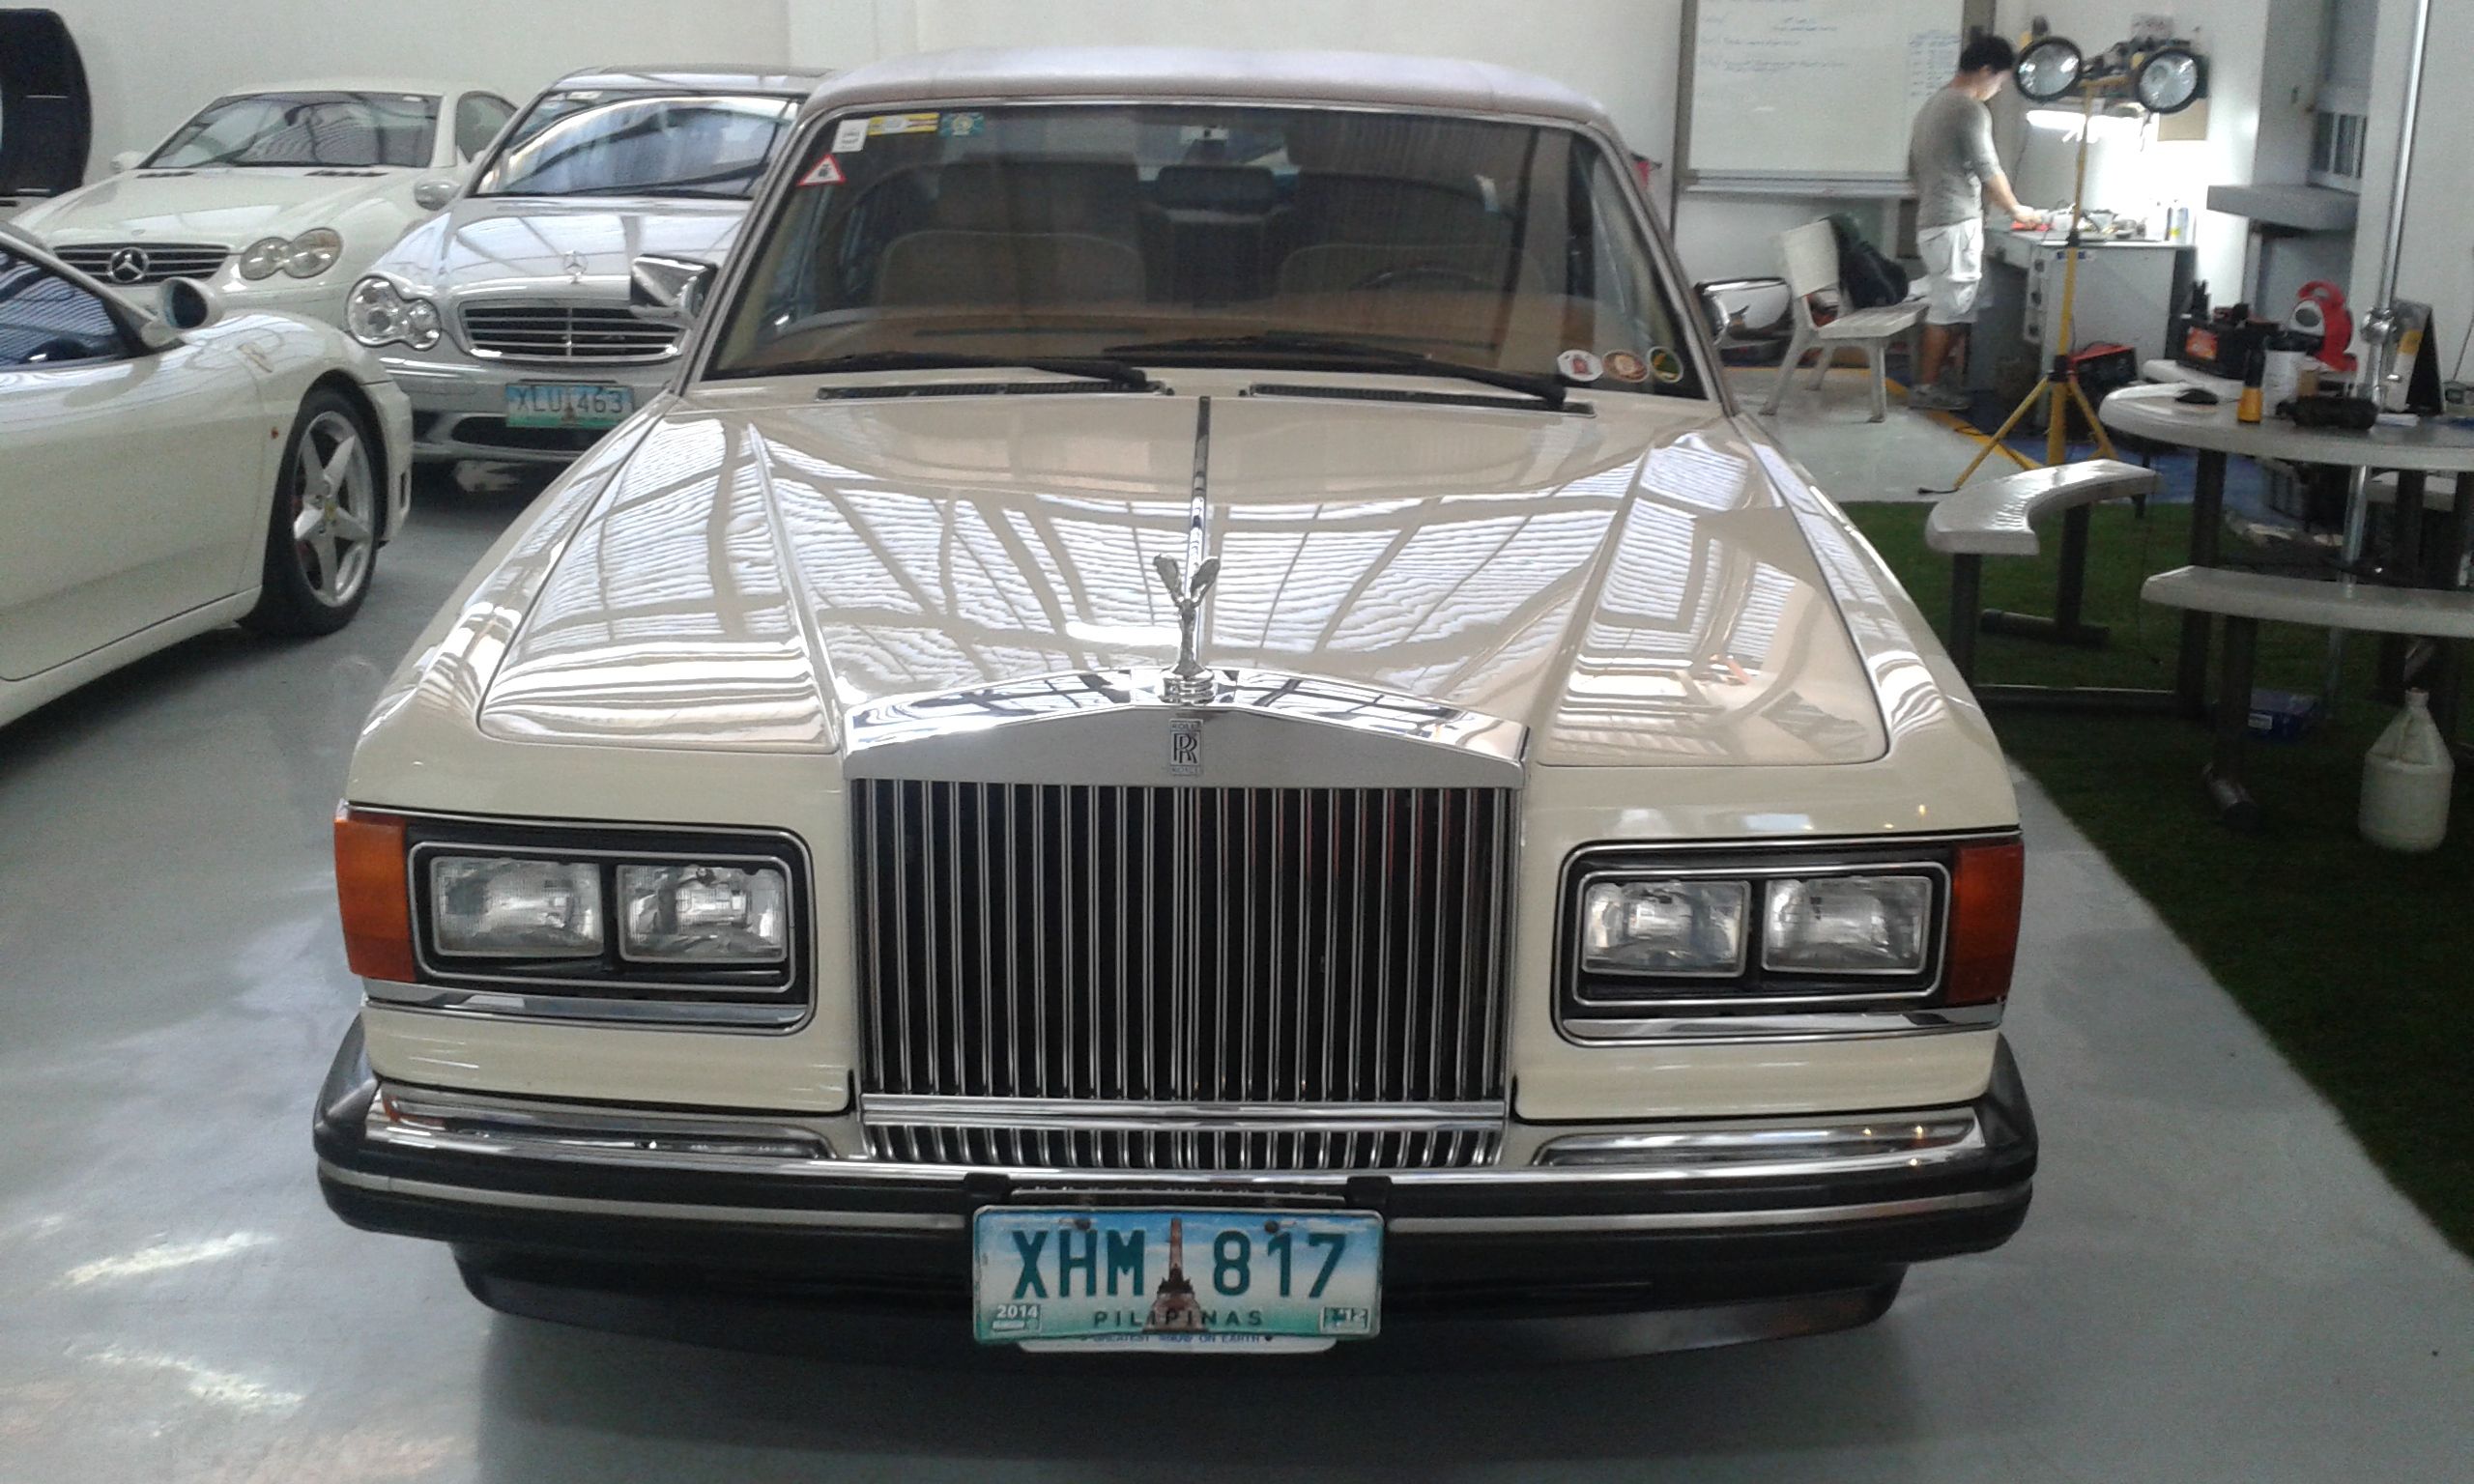 Used ROLLS ROYCE Cars for sale in London Buckinghamshire  The Motoring  Team